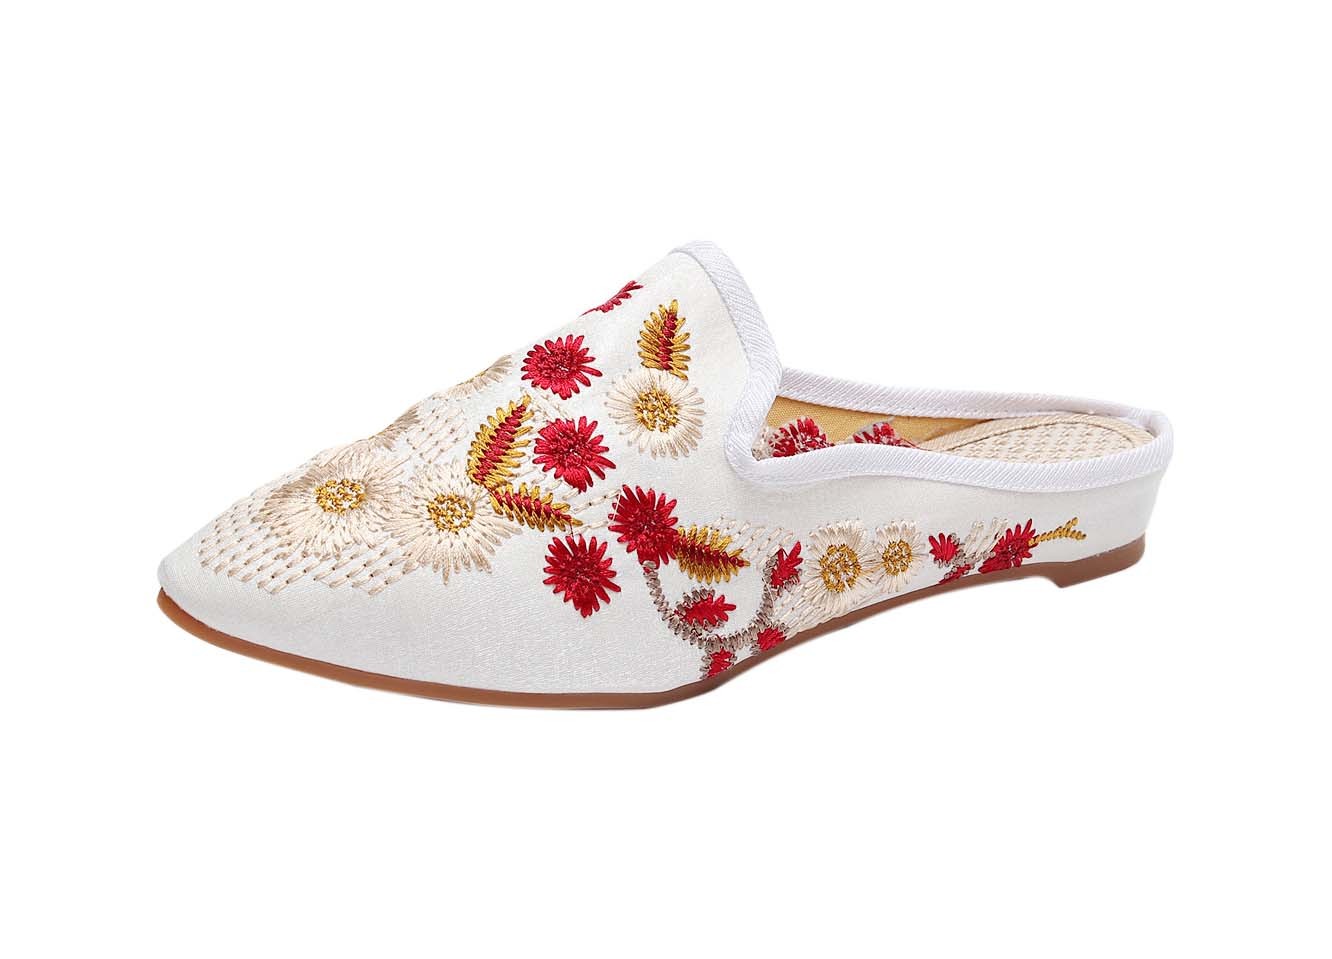 Women's Pointed Toe Backless Slippers Floral Embroidery Lazy Loafers Flat Shoes, White